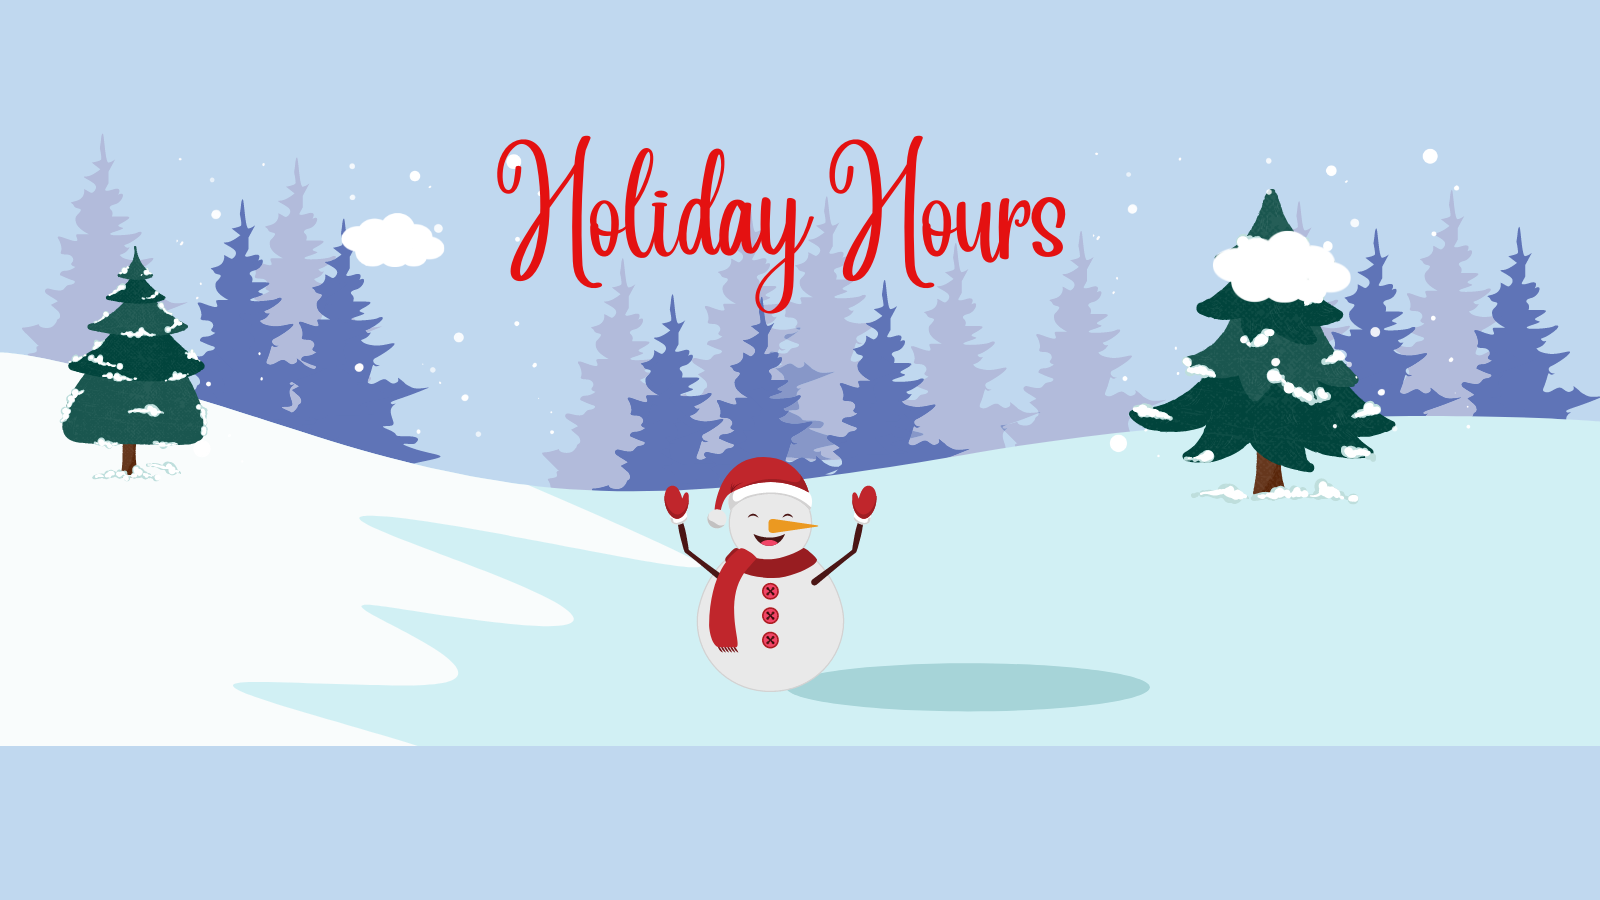 Text: Holiday Hours. Background Image features a winter scene with snow, a snowman, and evergreen trees.